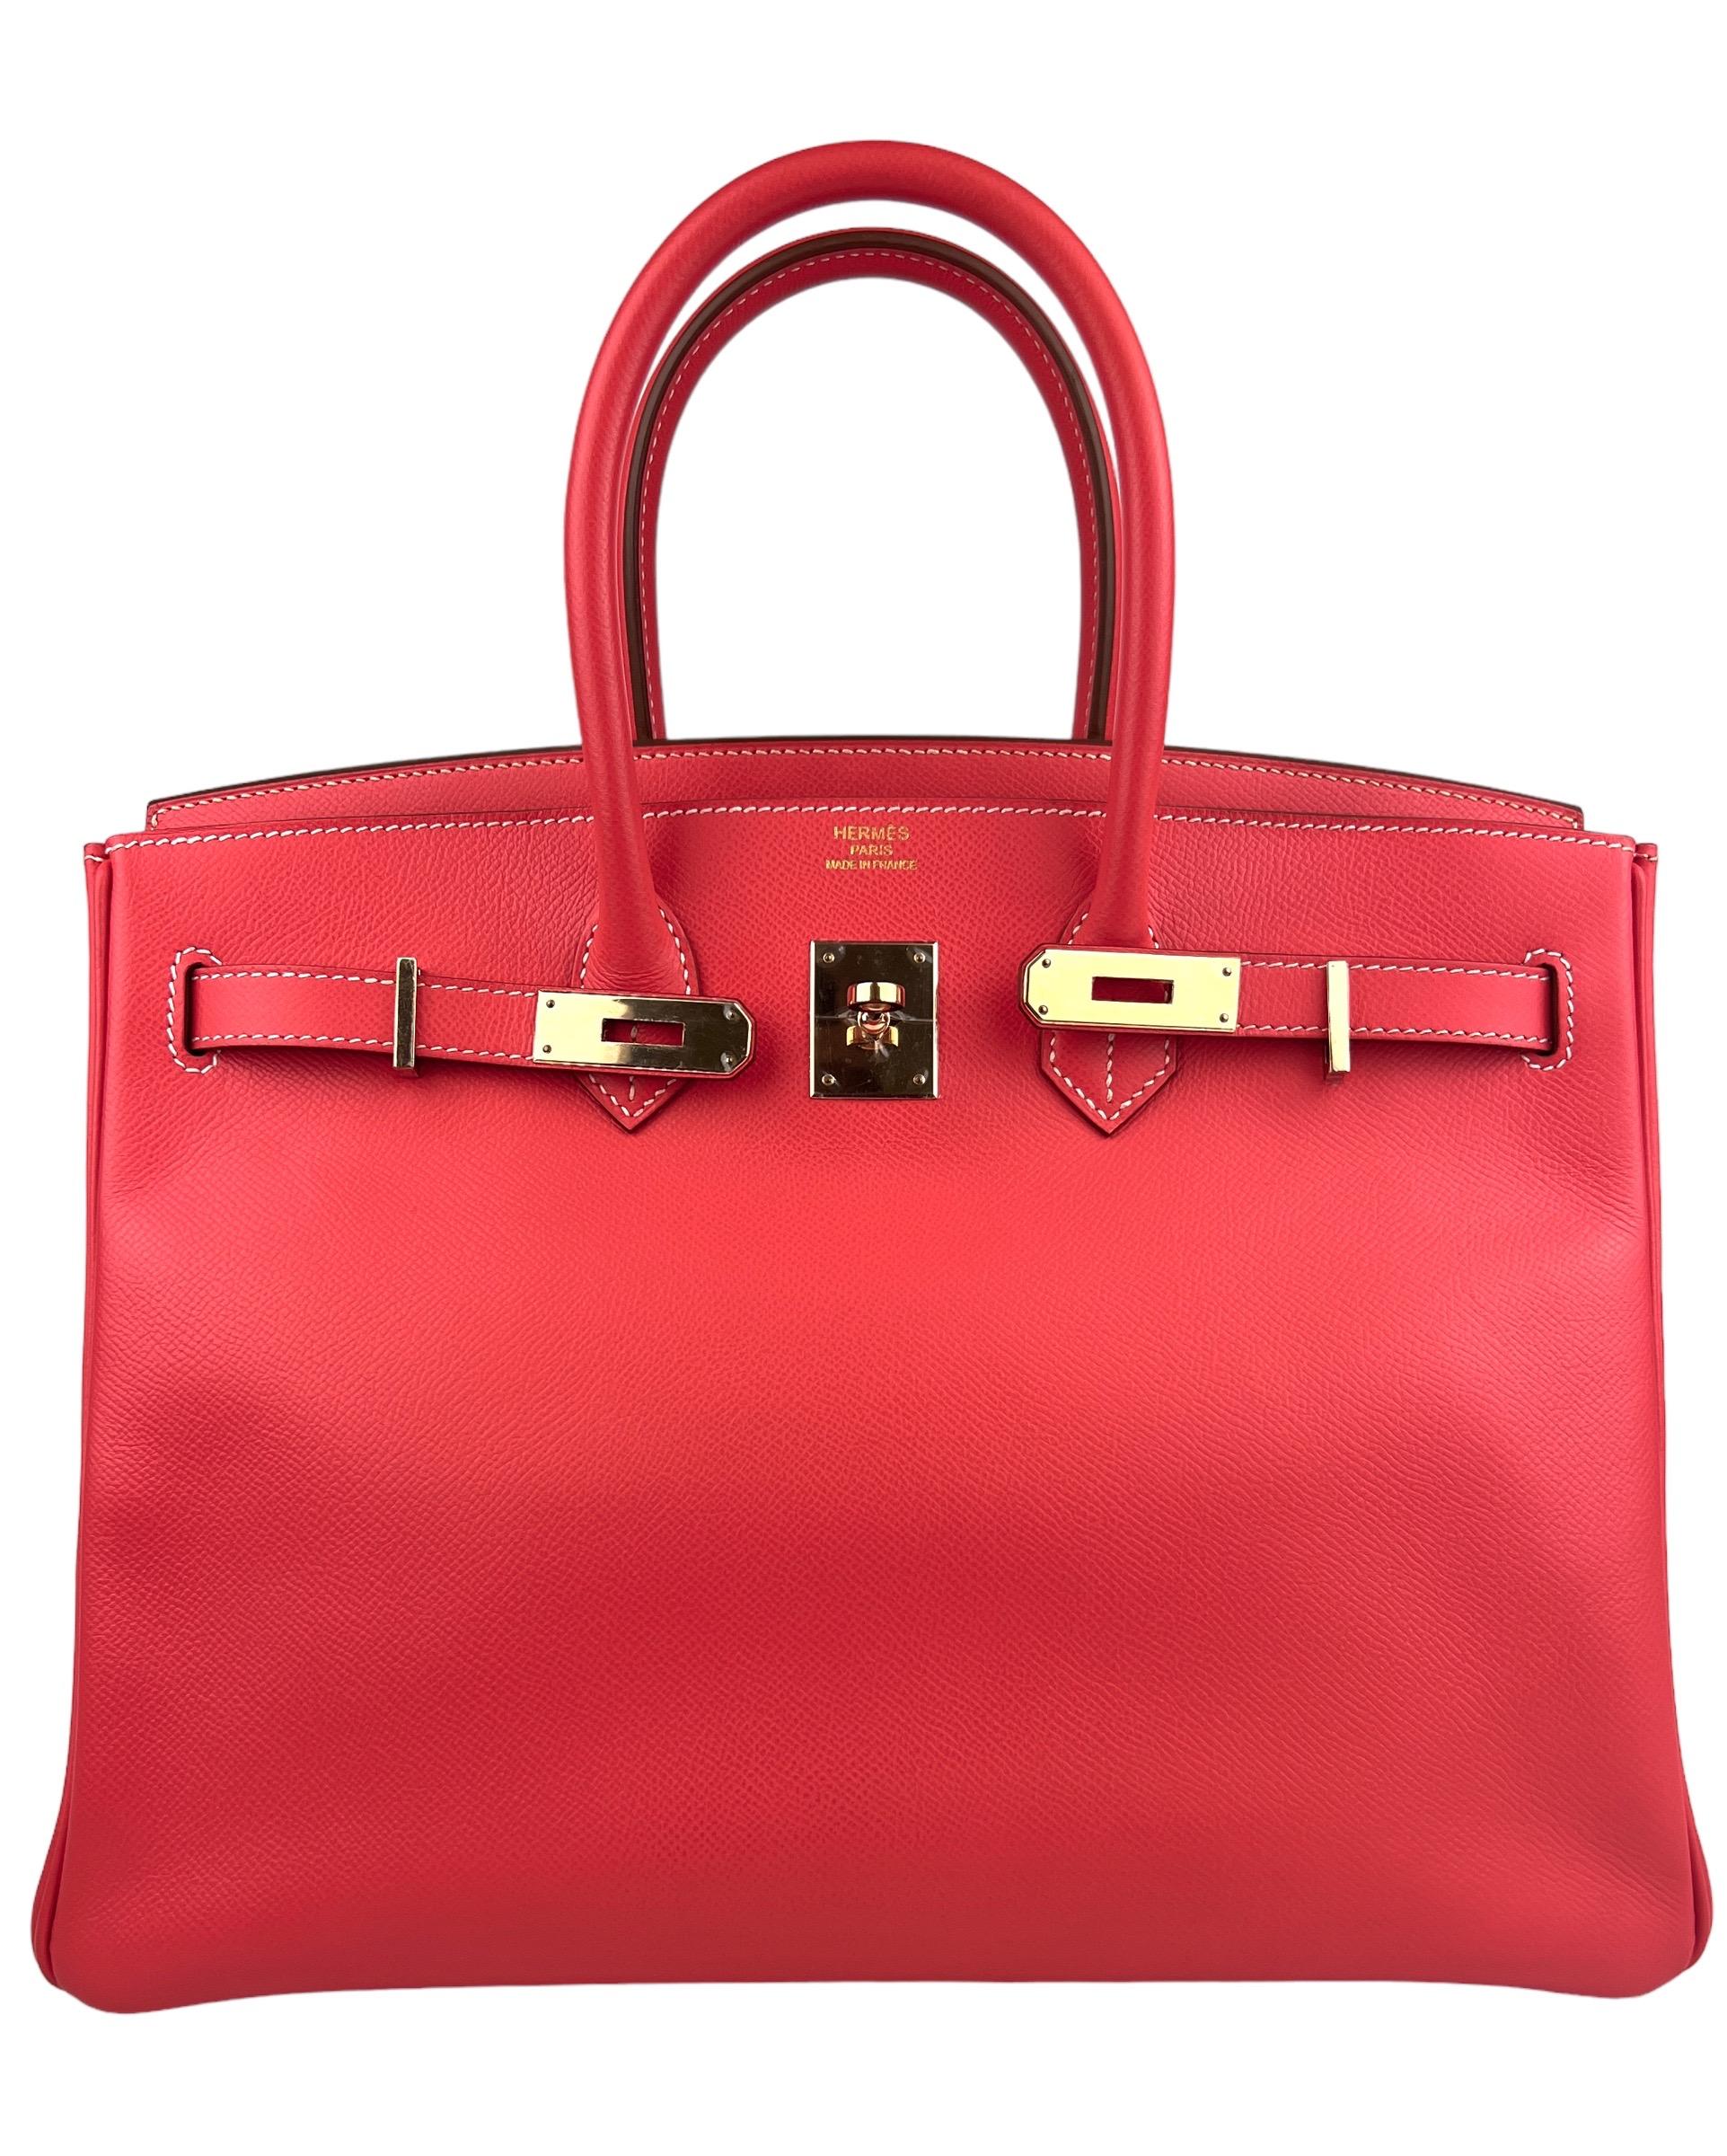 Hermes Birkin 35 Rose Jaipur Pink Red Gold Interior Candy Gold  Hardware  In Excellent Condition For Sale In Miami, FL